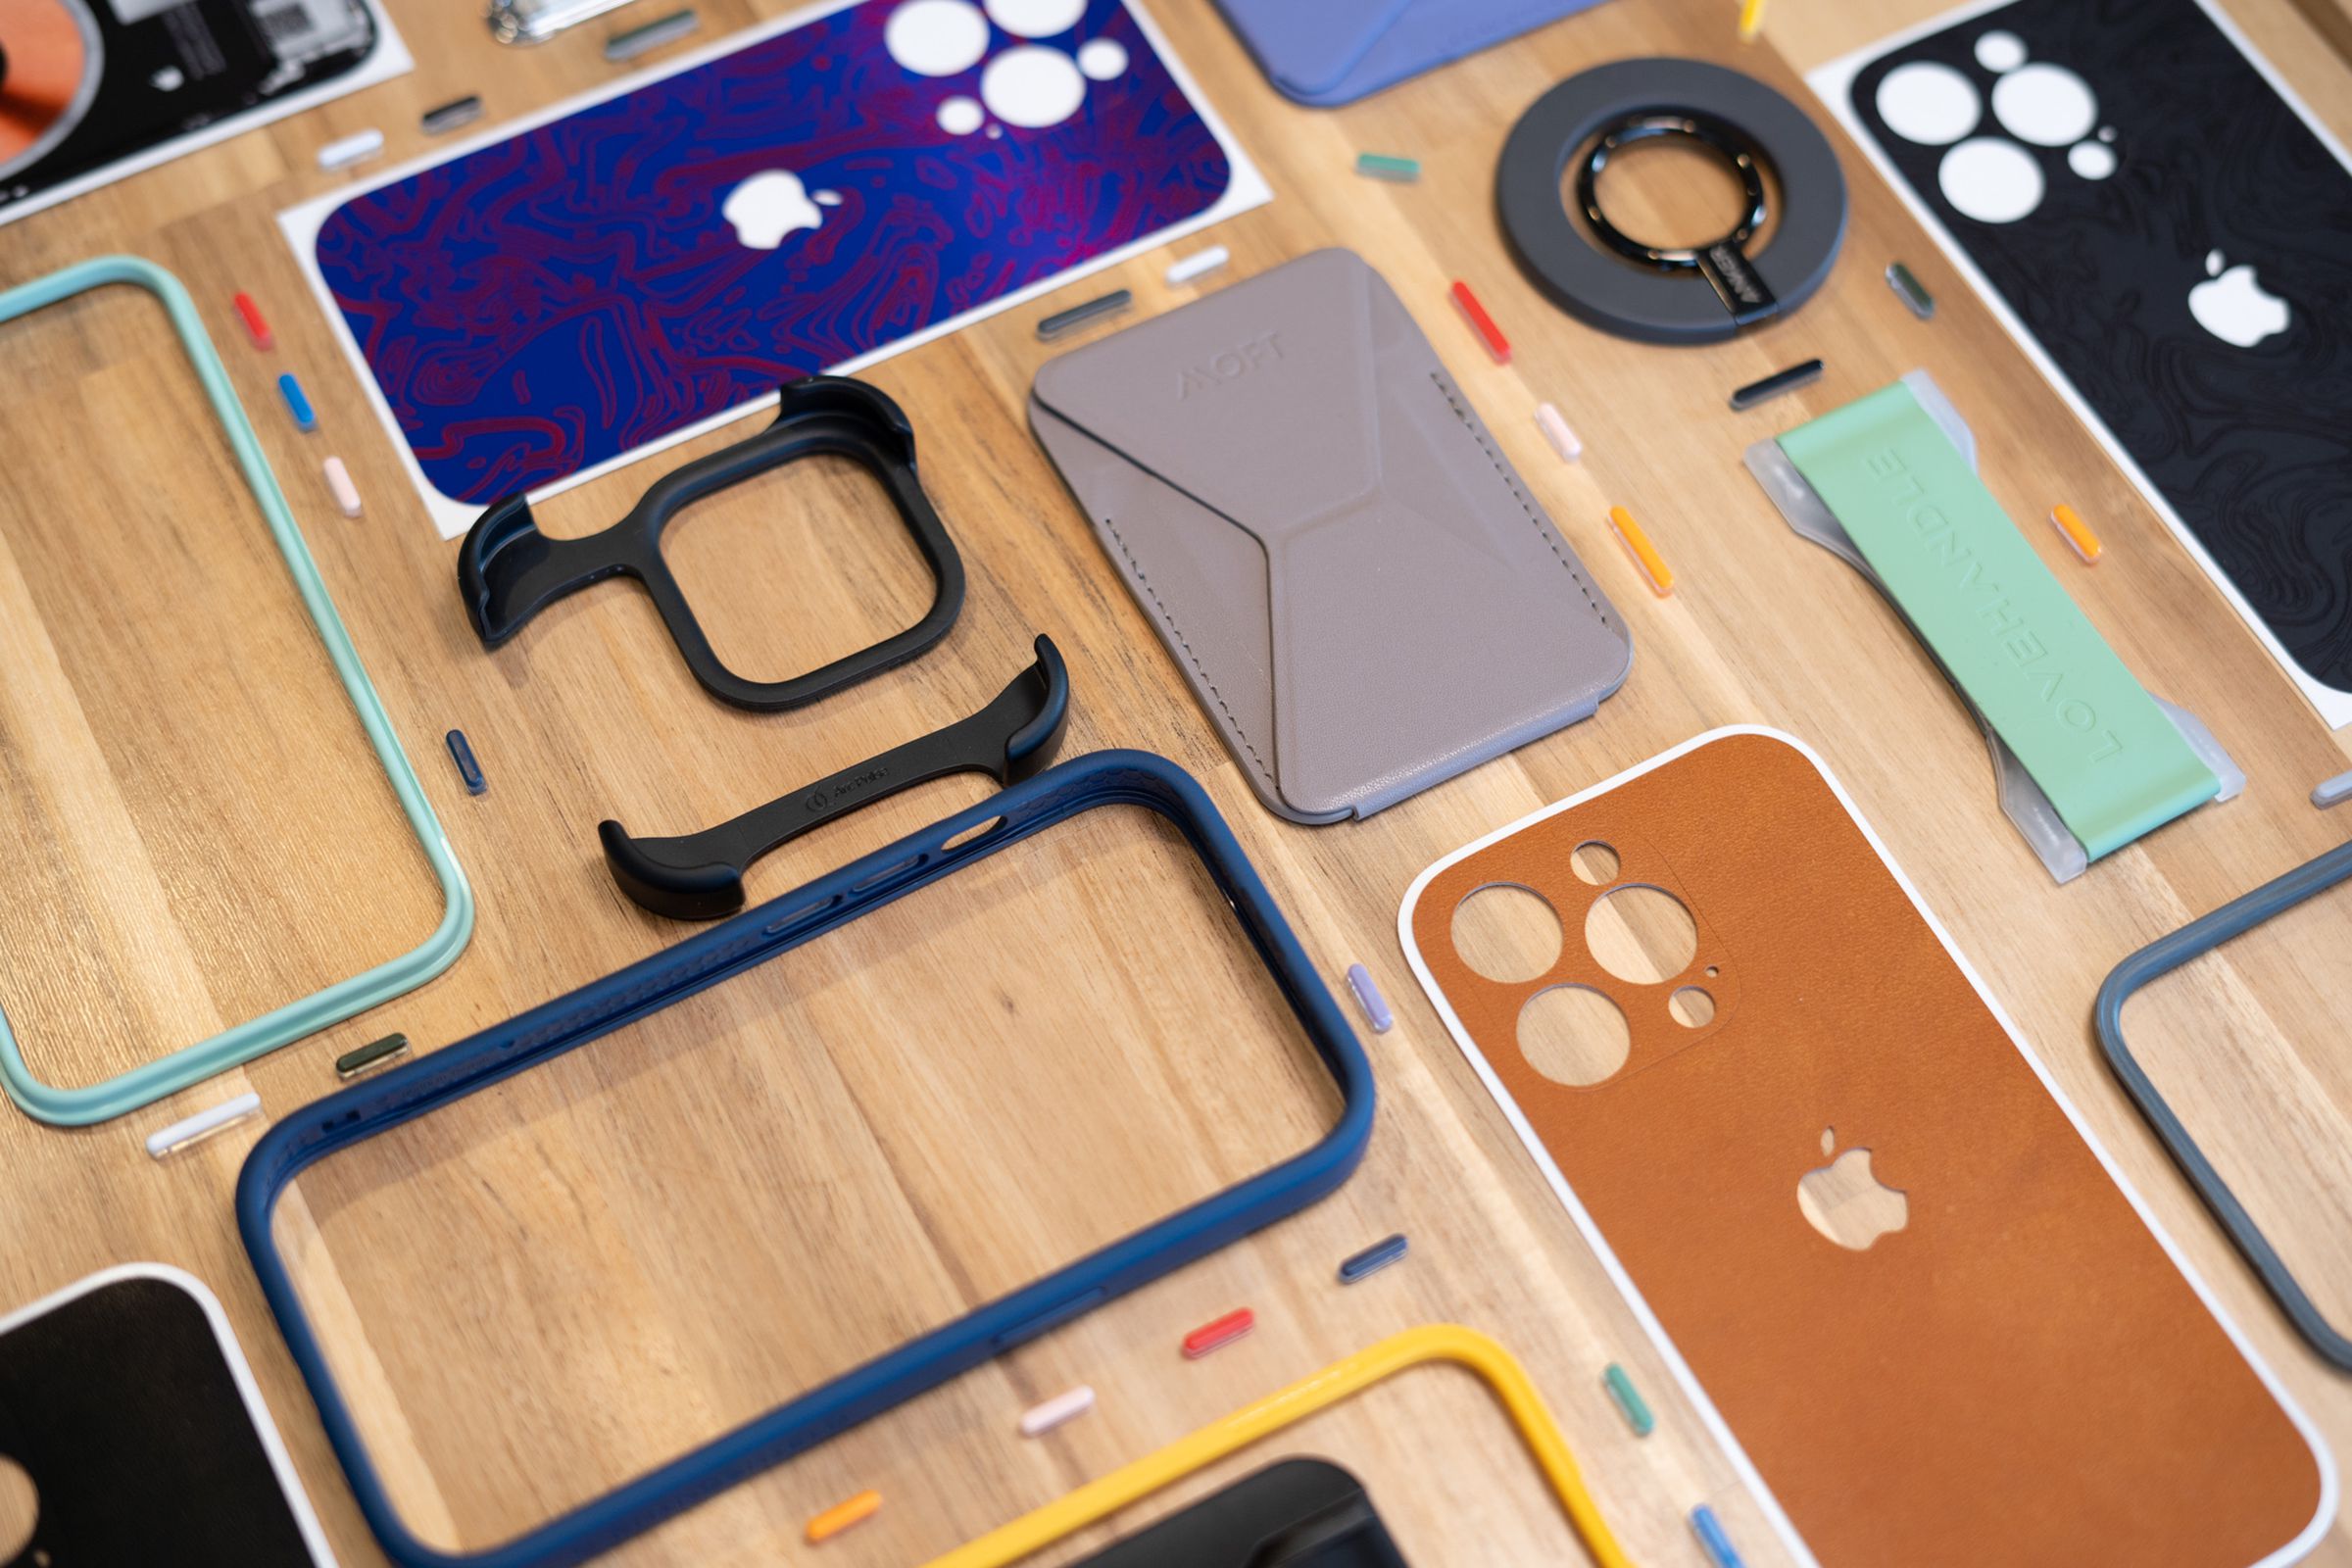 A set of wallets, grips, and colorful phone bumper cases with interchangeable buttons laid out on a table.